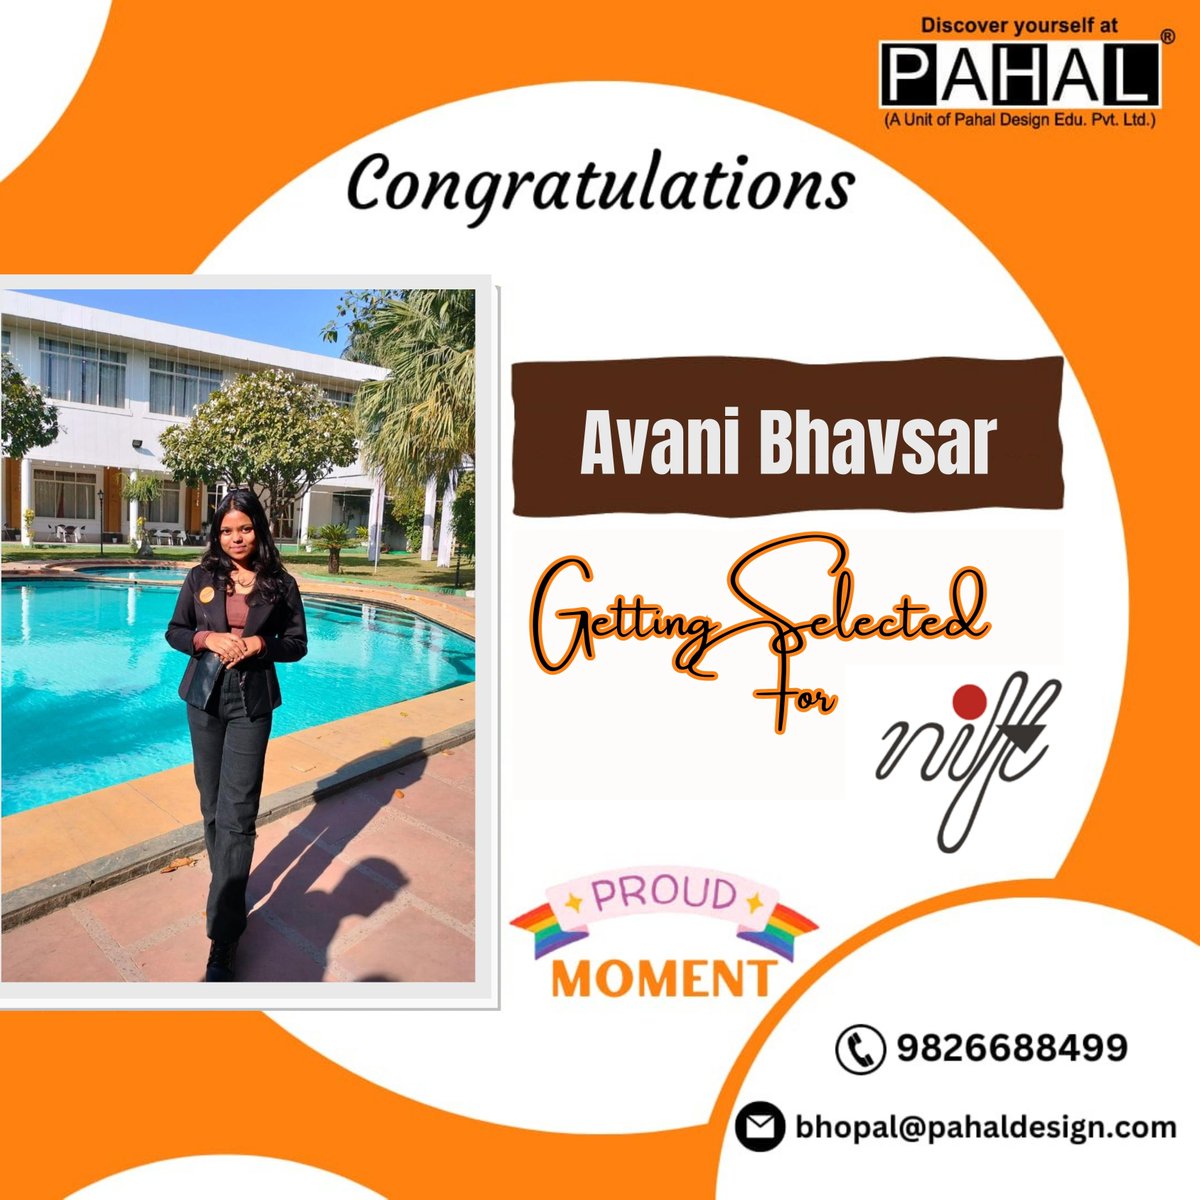 🎉🎉Congratulations to Avani Bhavsar on Getting Selected for NIFT.

Reach Us:
✉️ bhopal@pahaldesign.com
📞 9826688499, 7828271160

#congratulations #proudmoment #nift #nationalinstituteofdesign #design #designer #achievement #pahal_bhopal #pahaldesign #design #pahaldesignbhopal